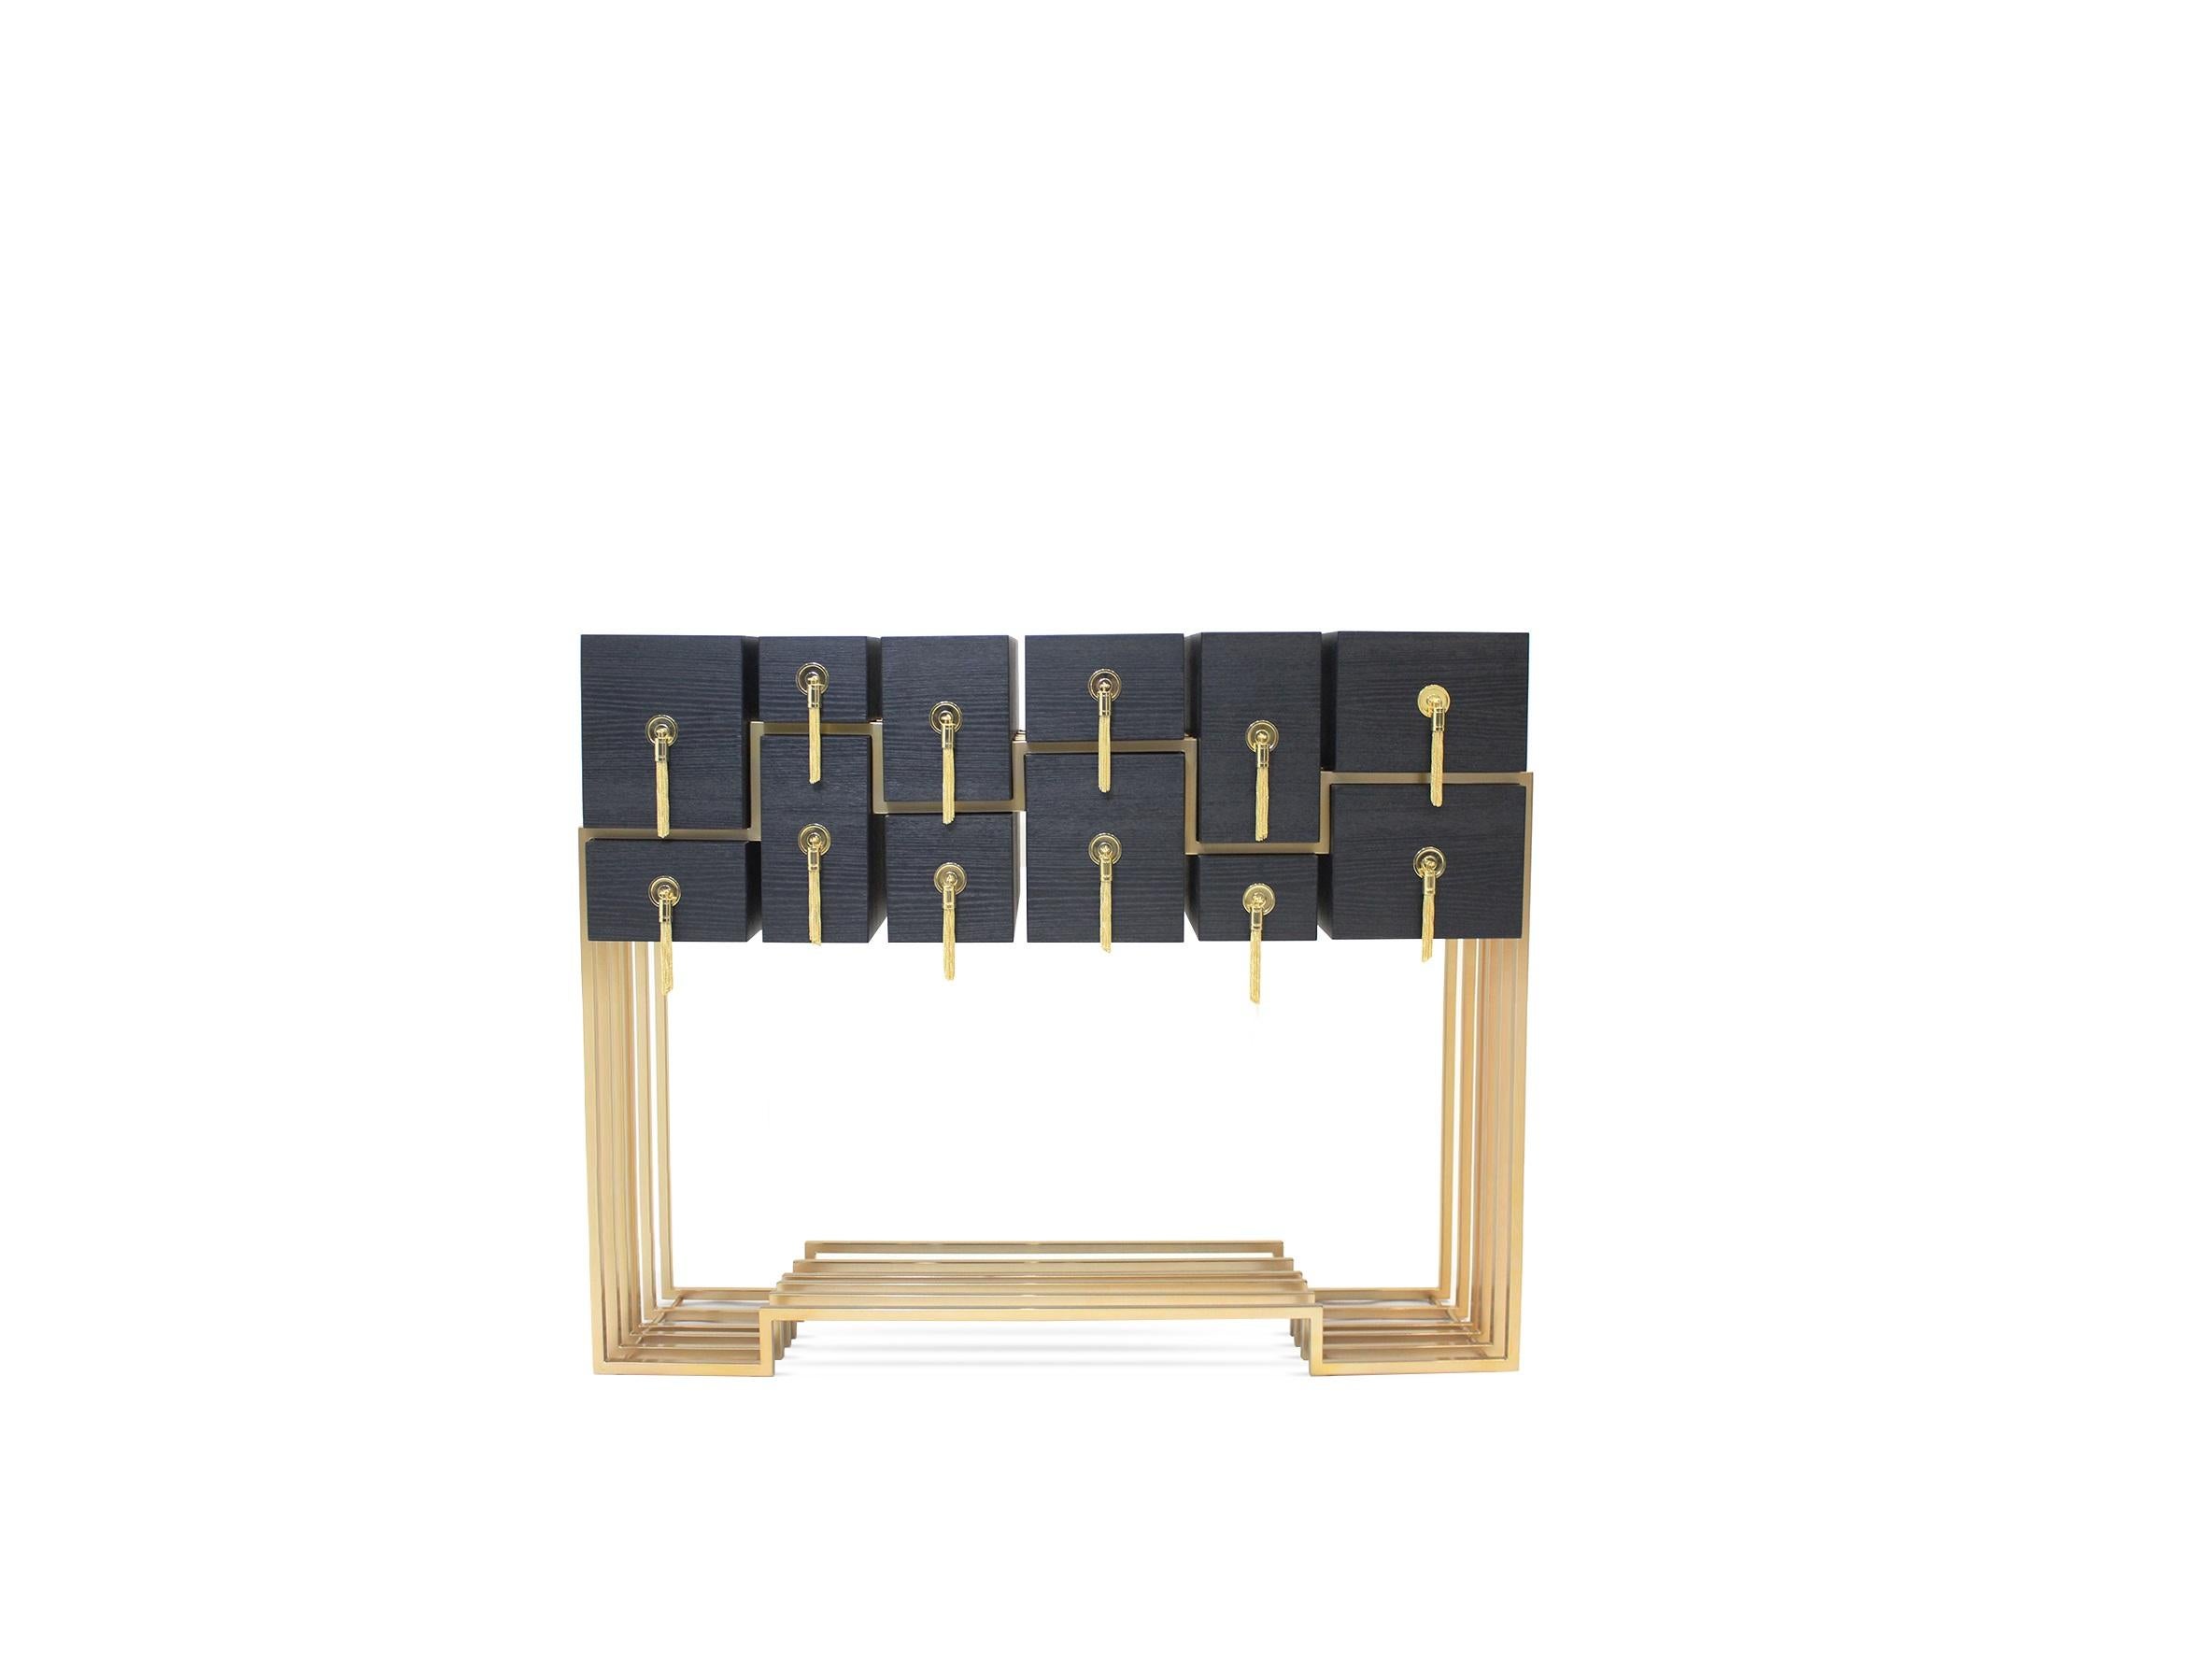 Modern design style console, a hymn to the interior design practice. It´s an icon piece of furniture with wonderful gold lines, capable to inspire luxury interiors.
Exterior brushed oak with black or white satin in satin finish.
12 drawers